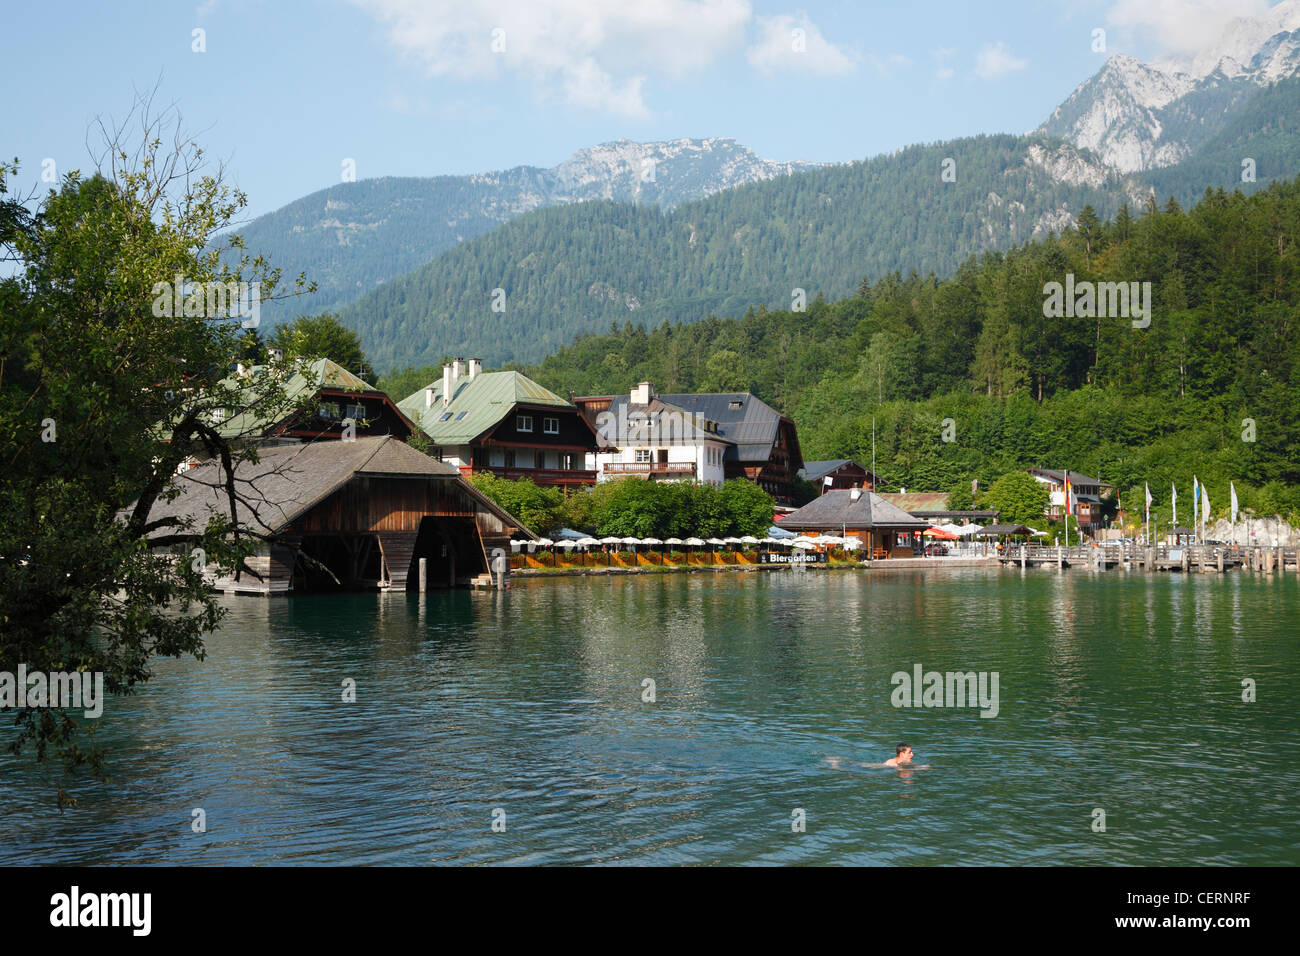 Young swimmer and people bathing in Lake Königsee, Berchtesgaden, Bavaria, Germany, on a hot summer day Stock Photo